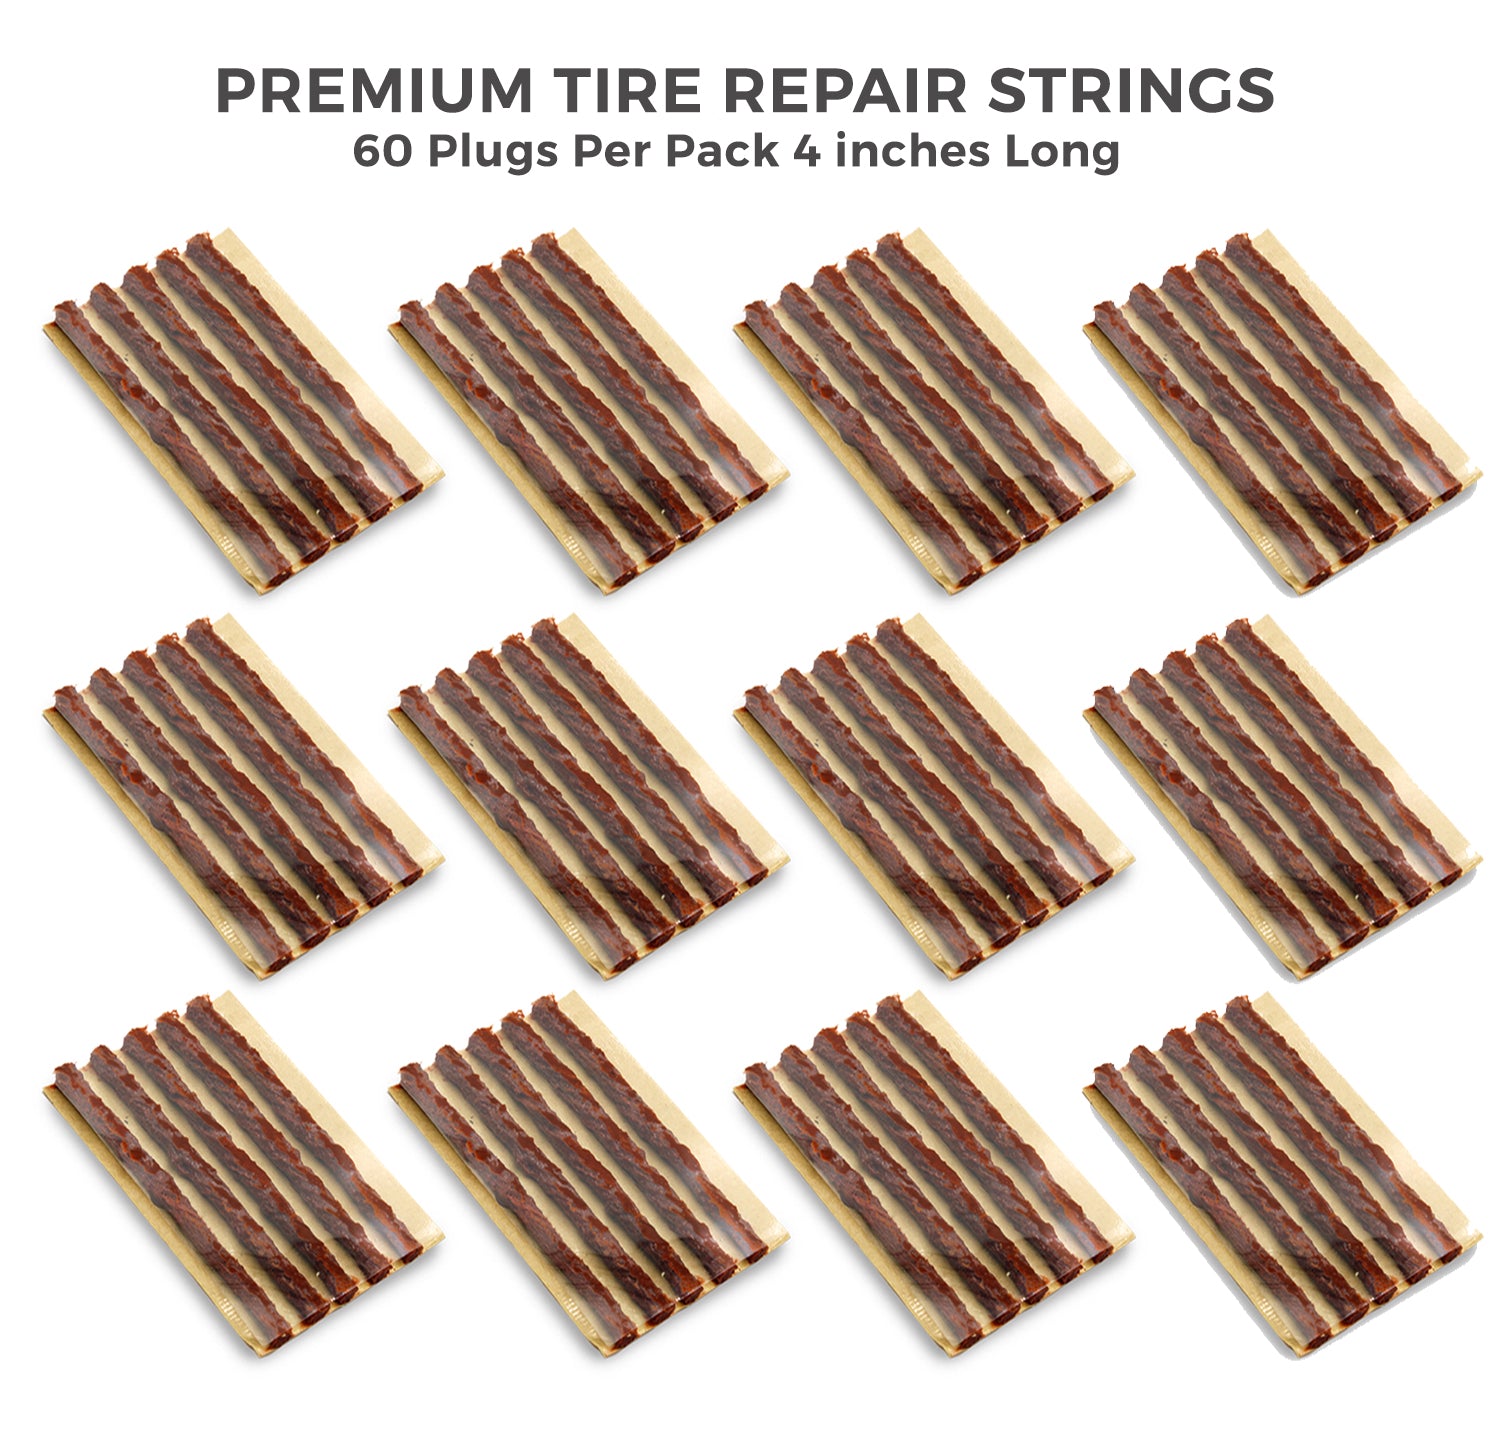 4" Brown Tire Plug String Inserts For Tubless Flat Tire Repair Seal